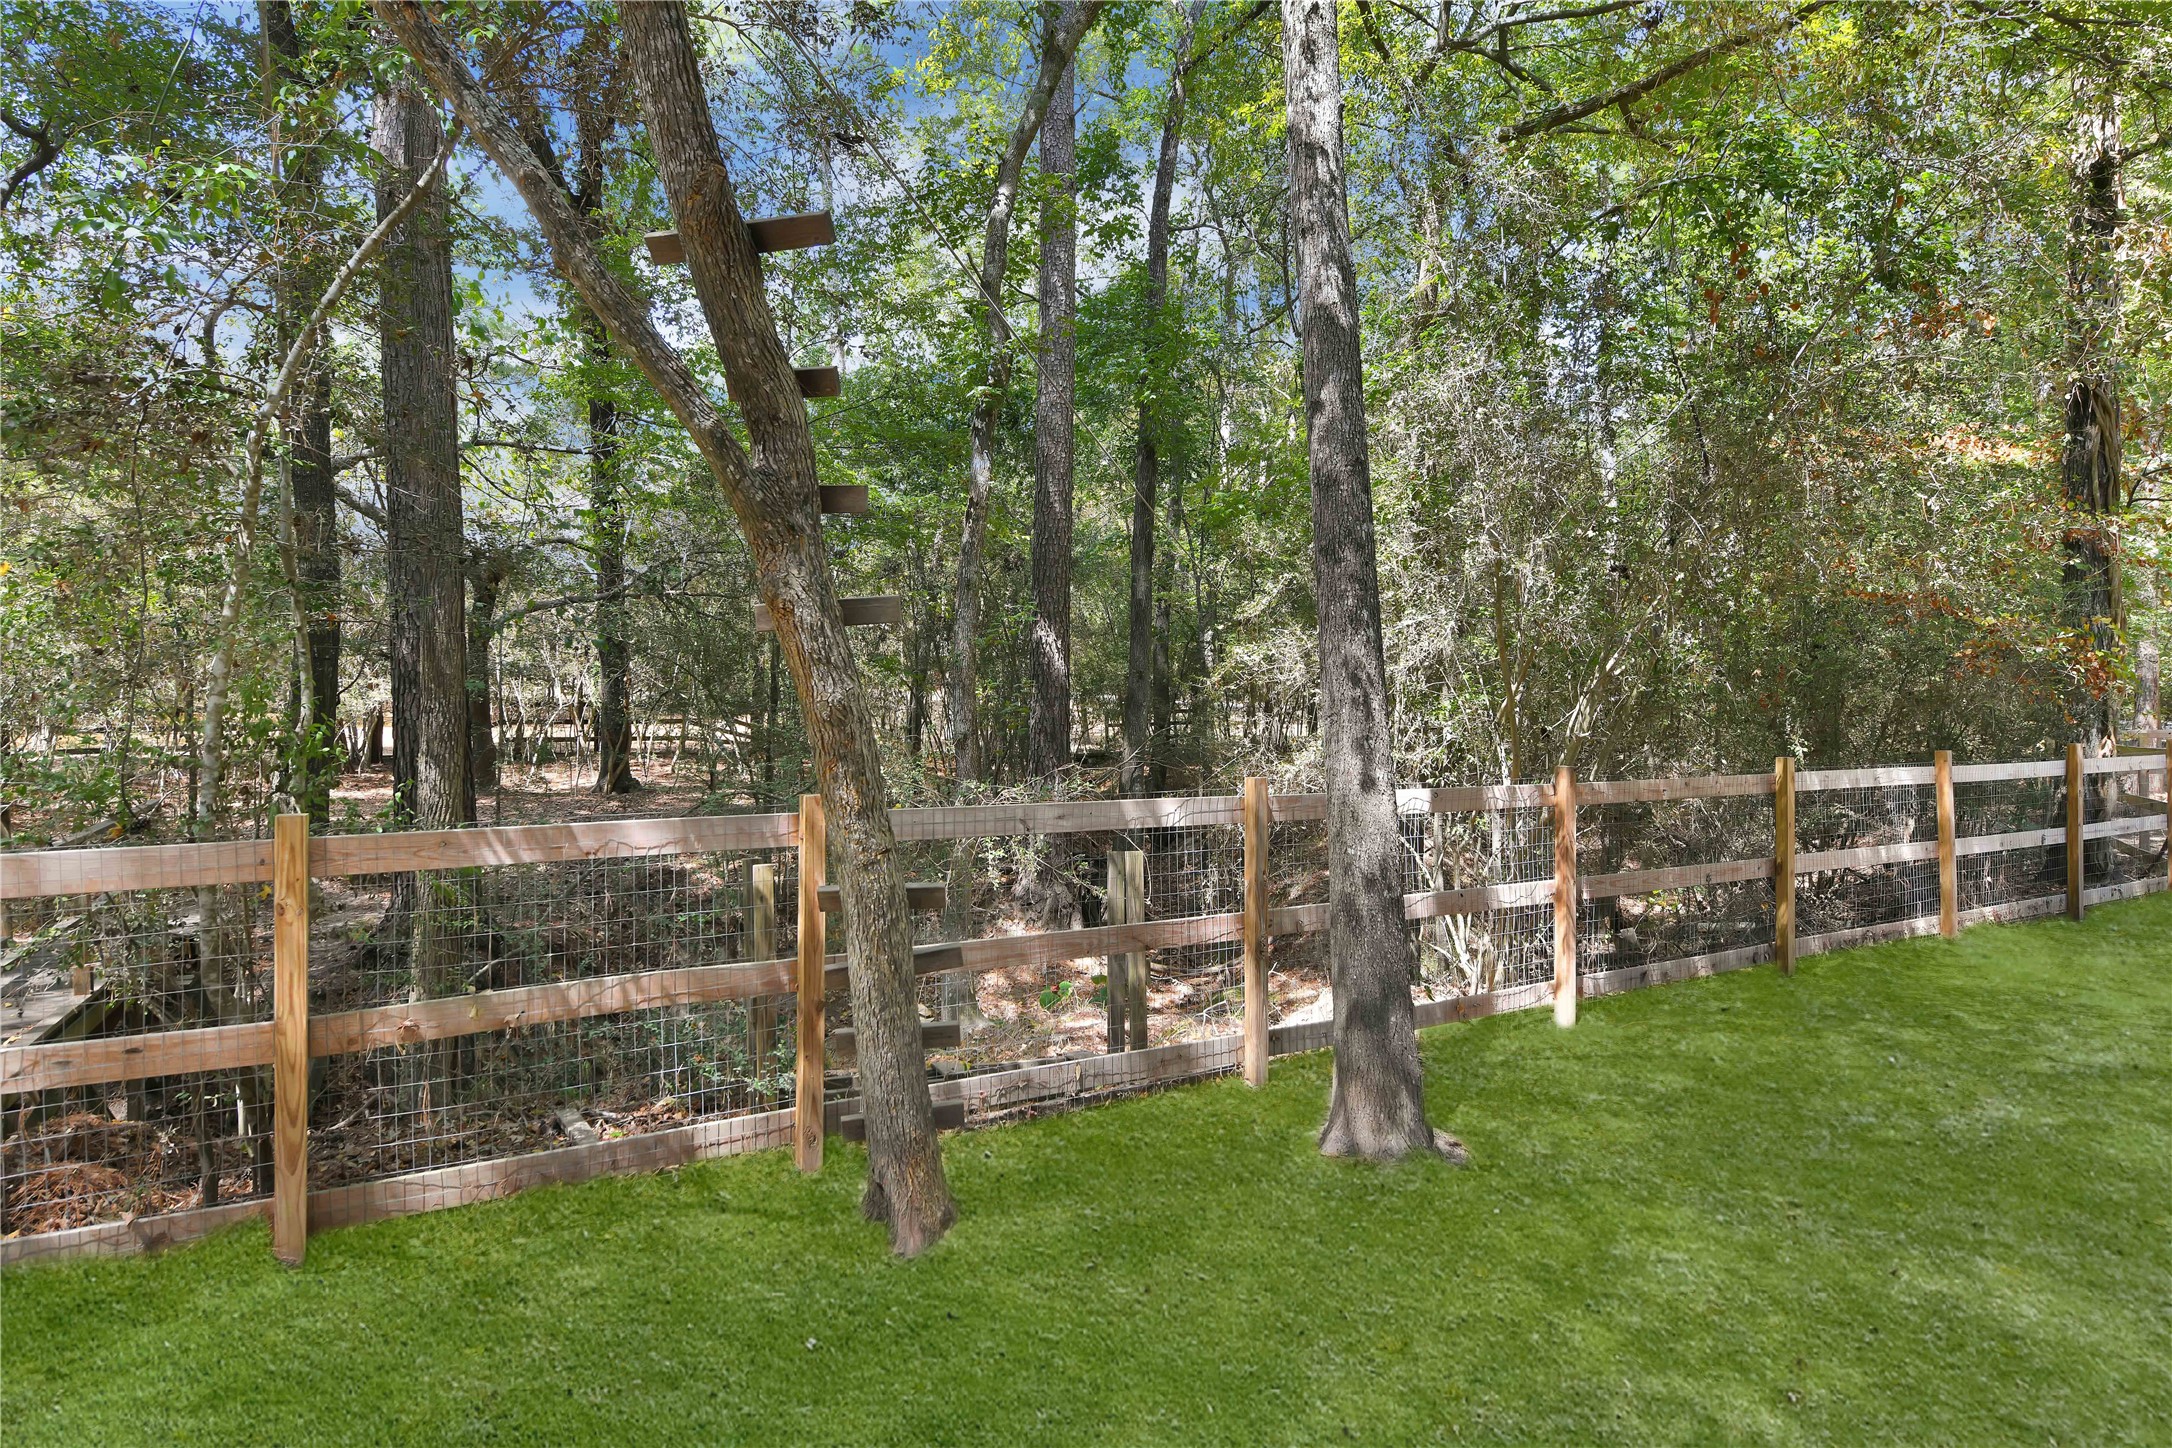 16603 Surrey Ln- Lovely fencing surrounds the property, sprinkler system, and gated entry.